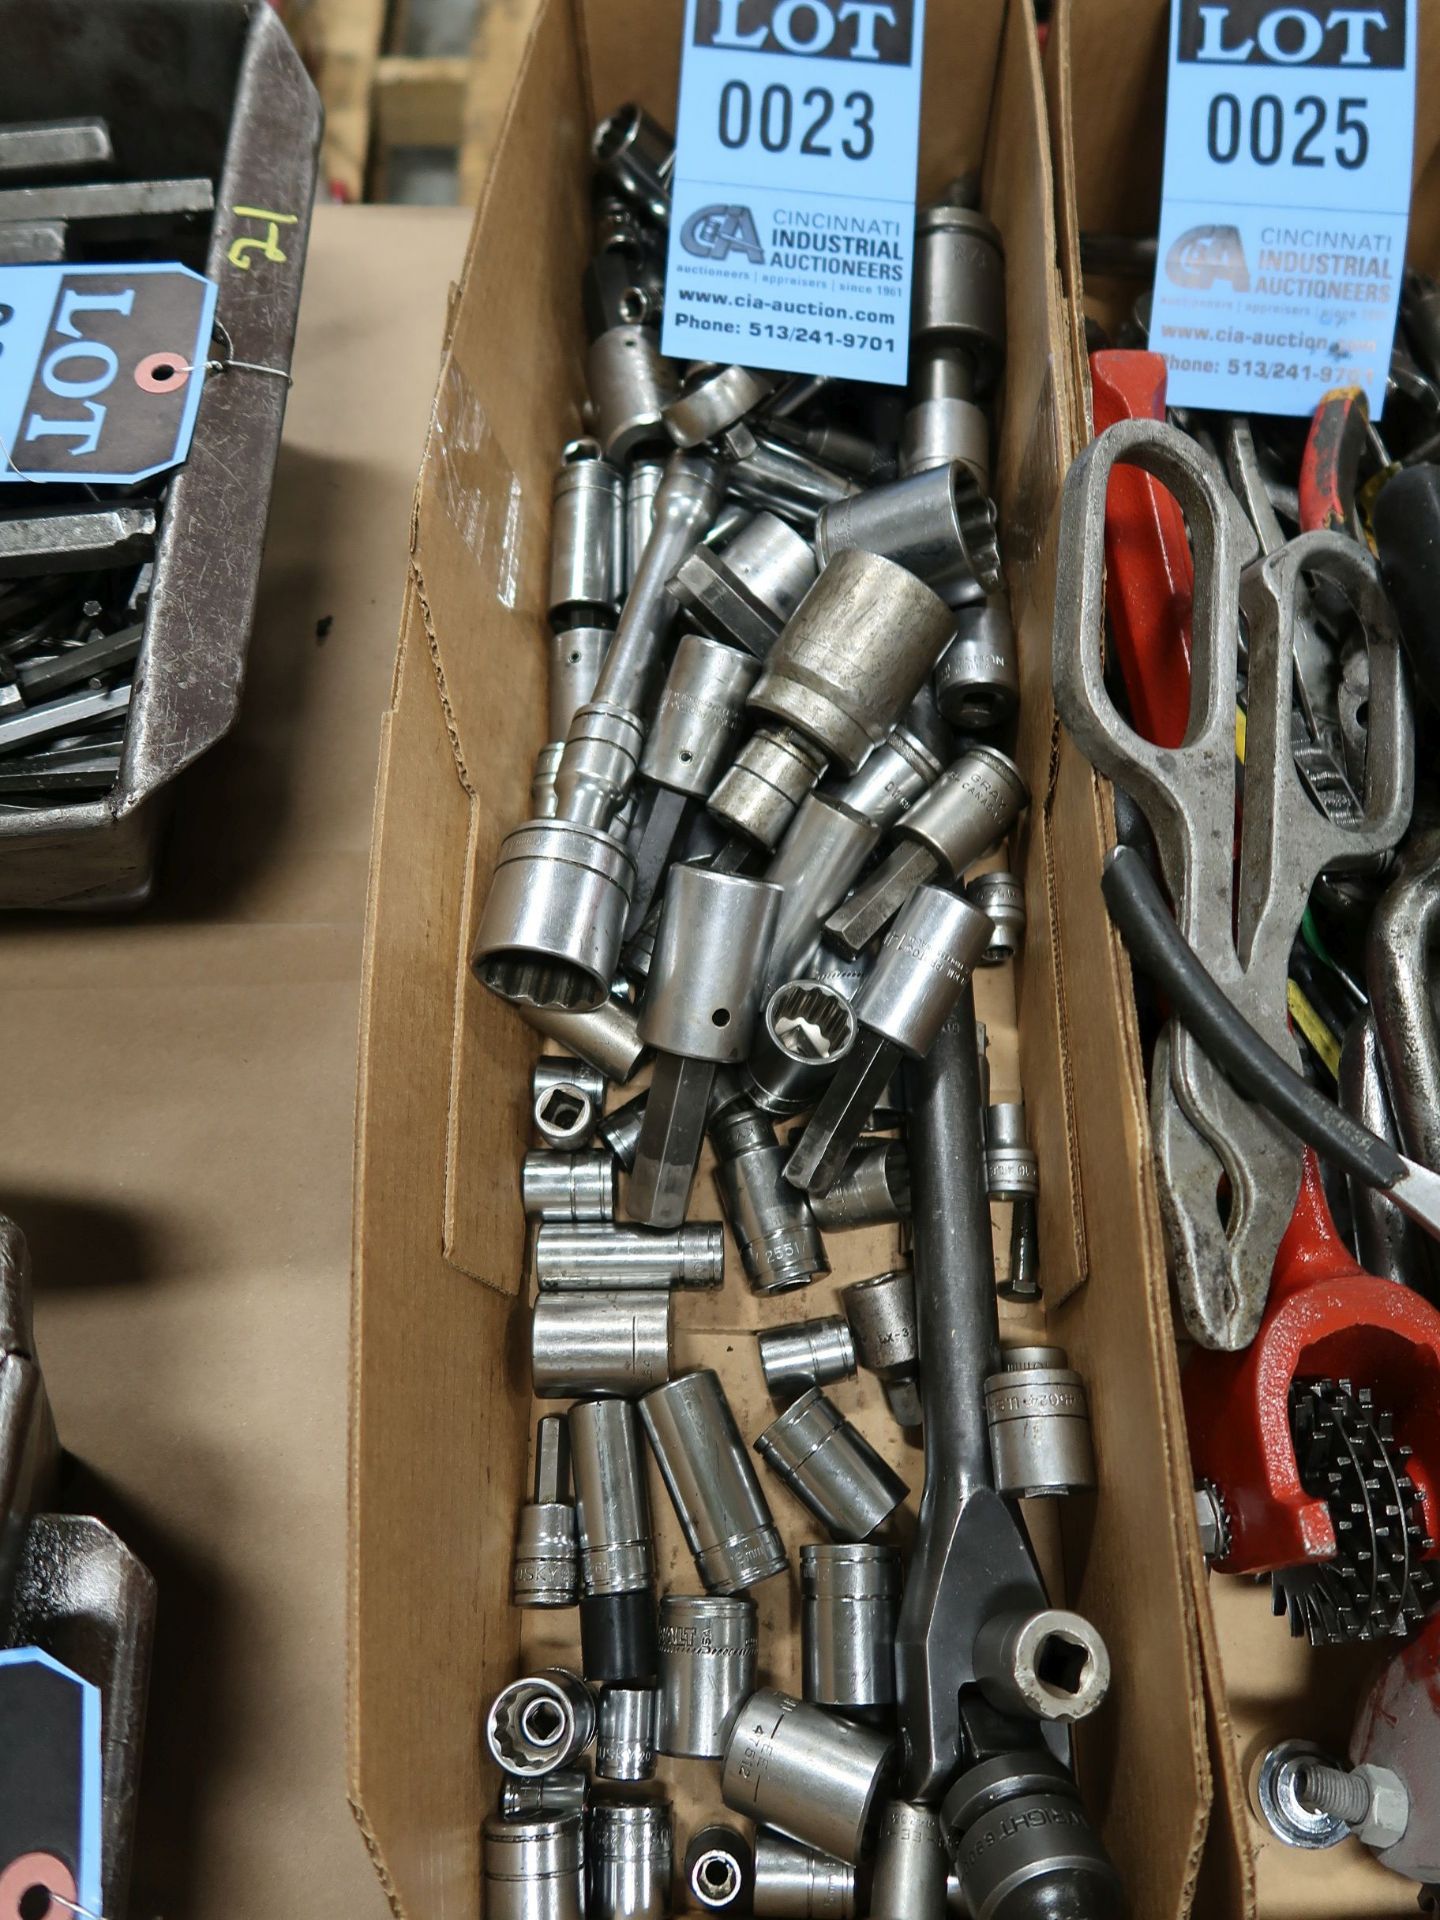 (LOT) SOCKET WRENCHES AND SOCKETS